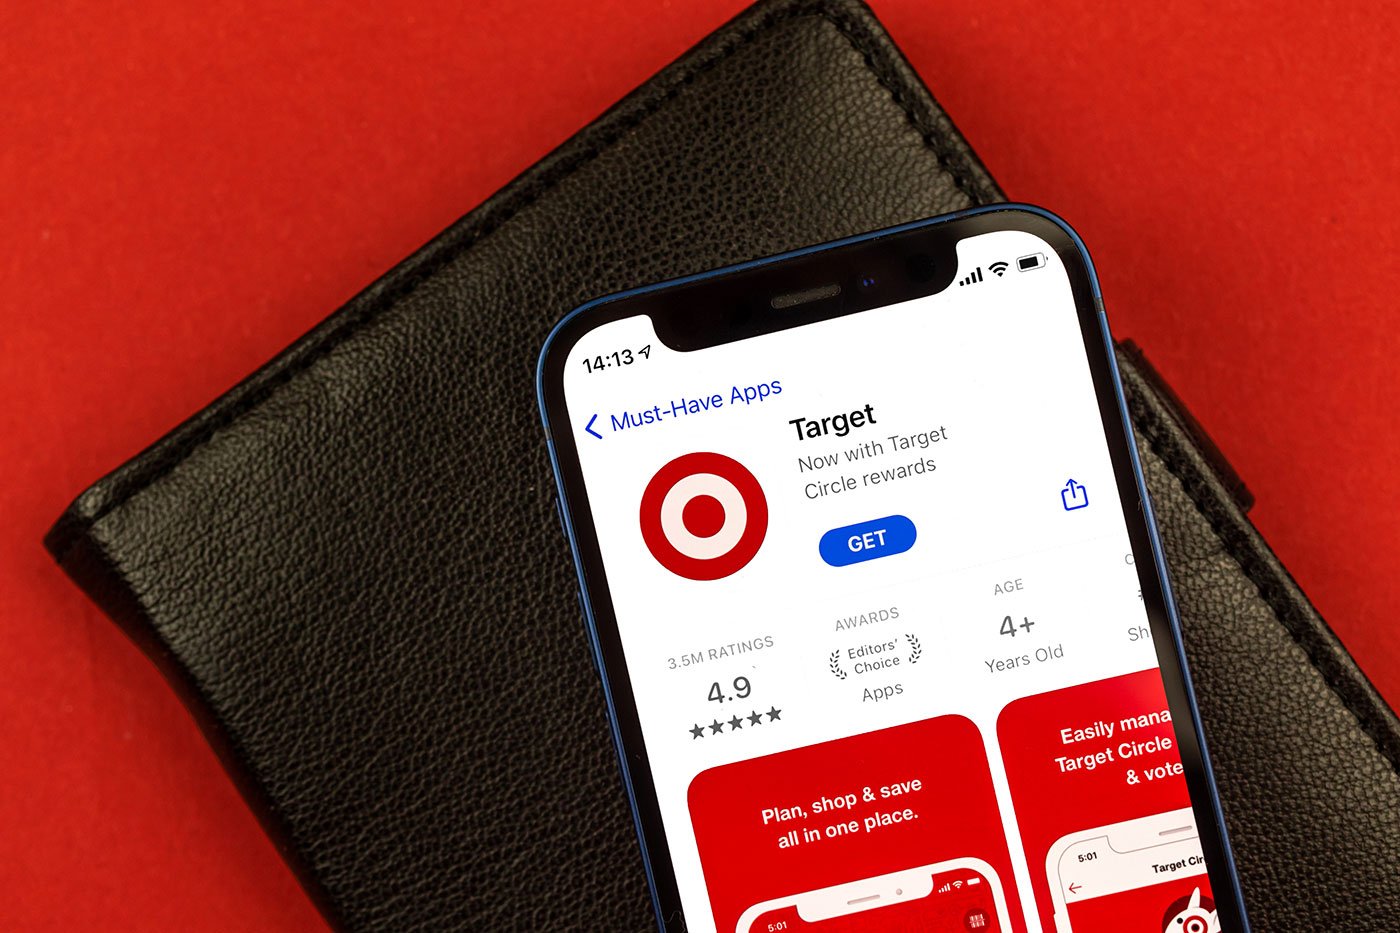 Google might’ve accidentally approved an ad for a Target gift card scam